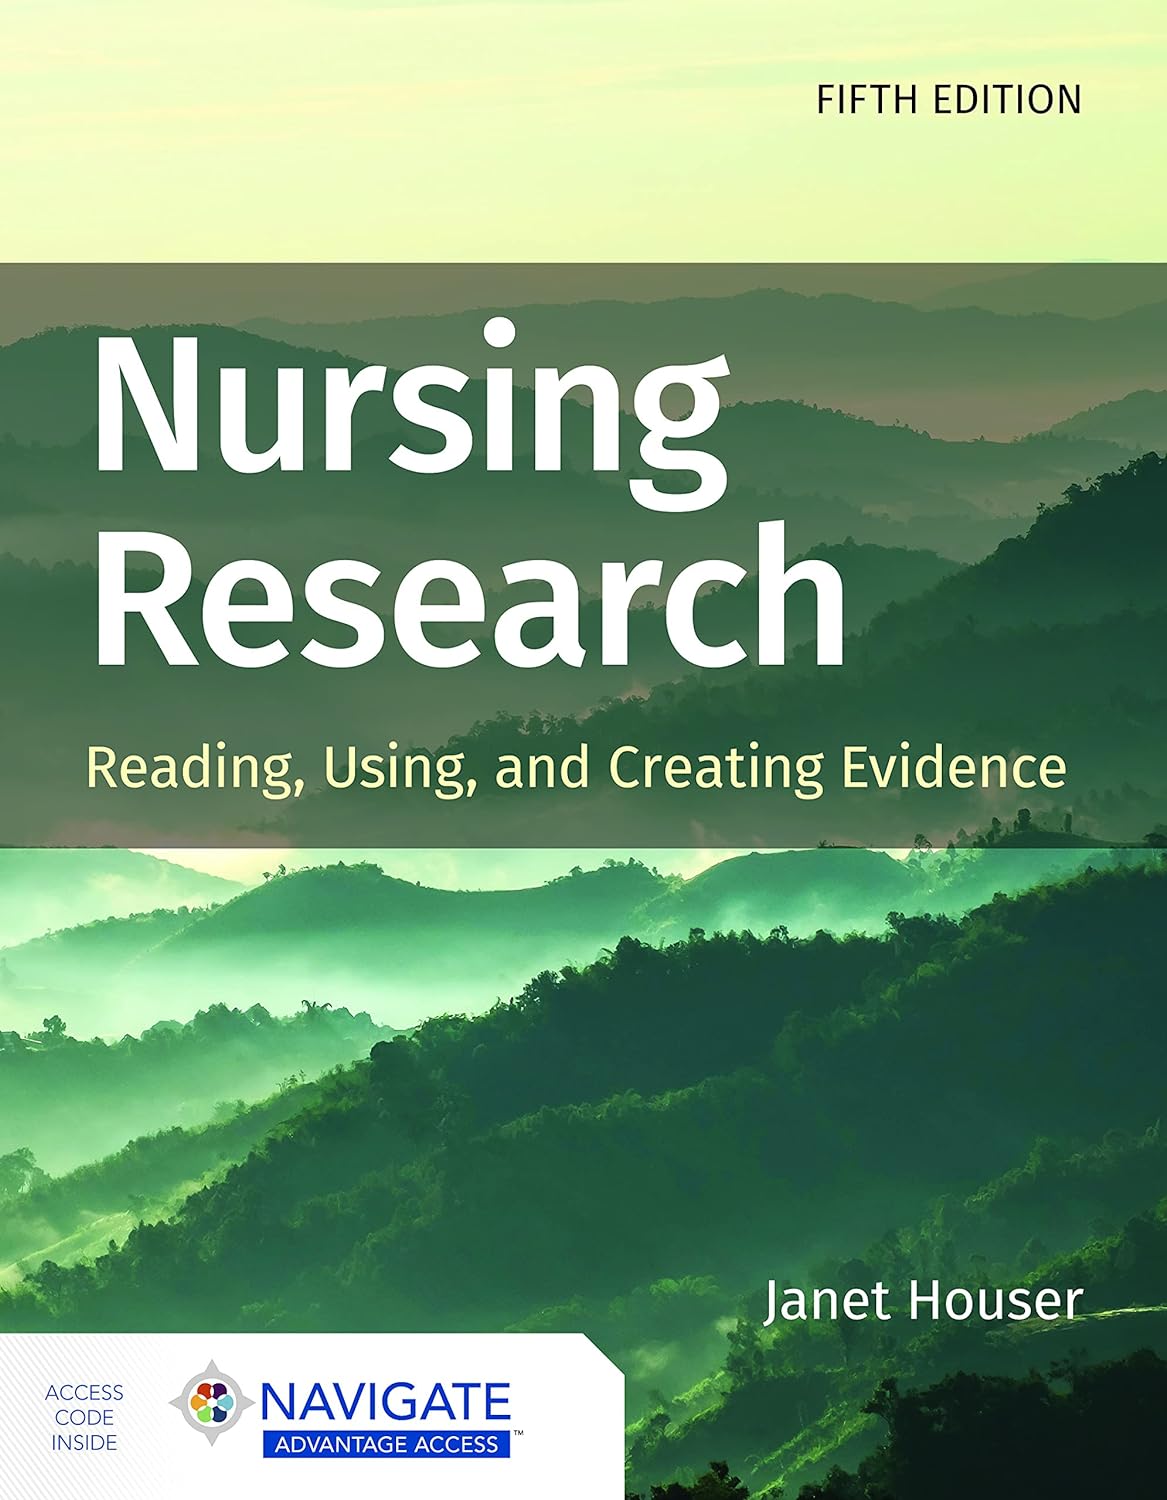 Nursing Research: Reading, Using, and Creating Evidence, 5th Edition  by Janet Houser 